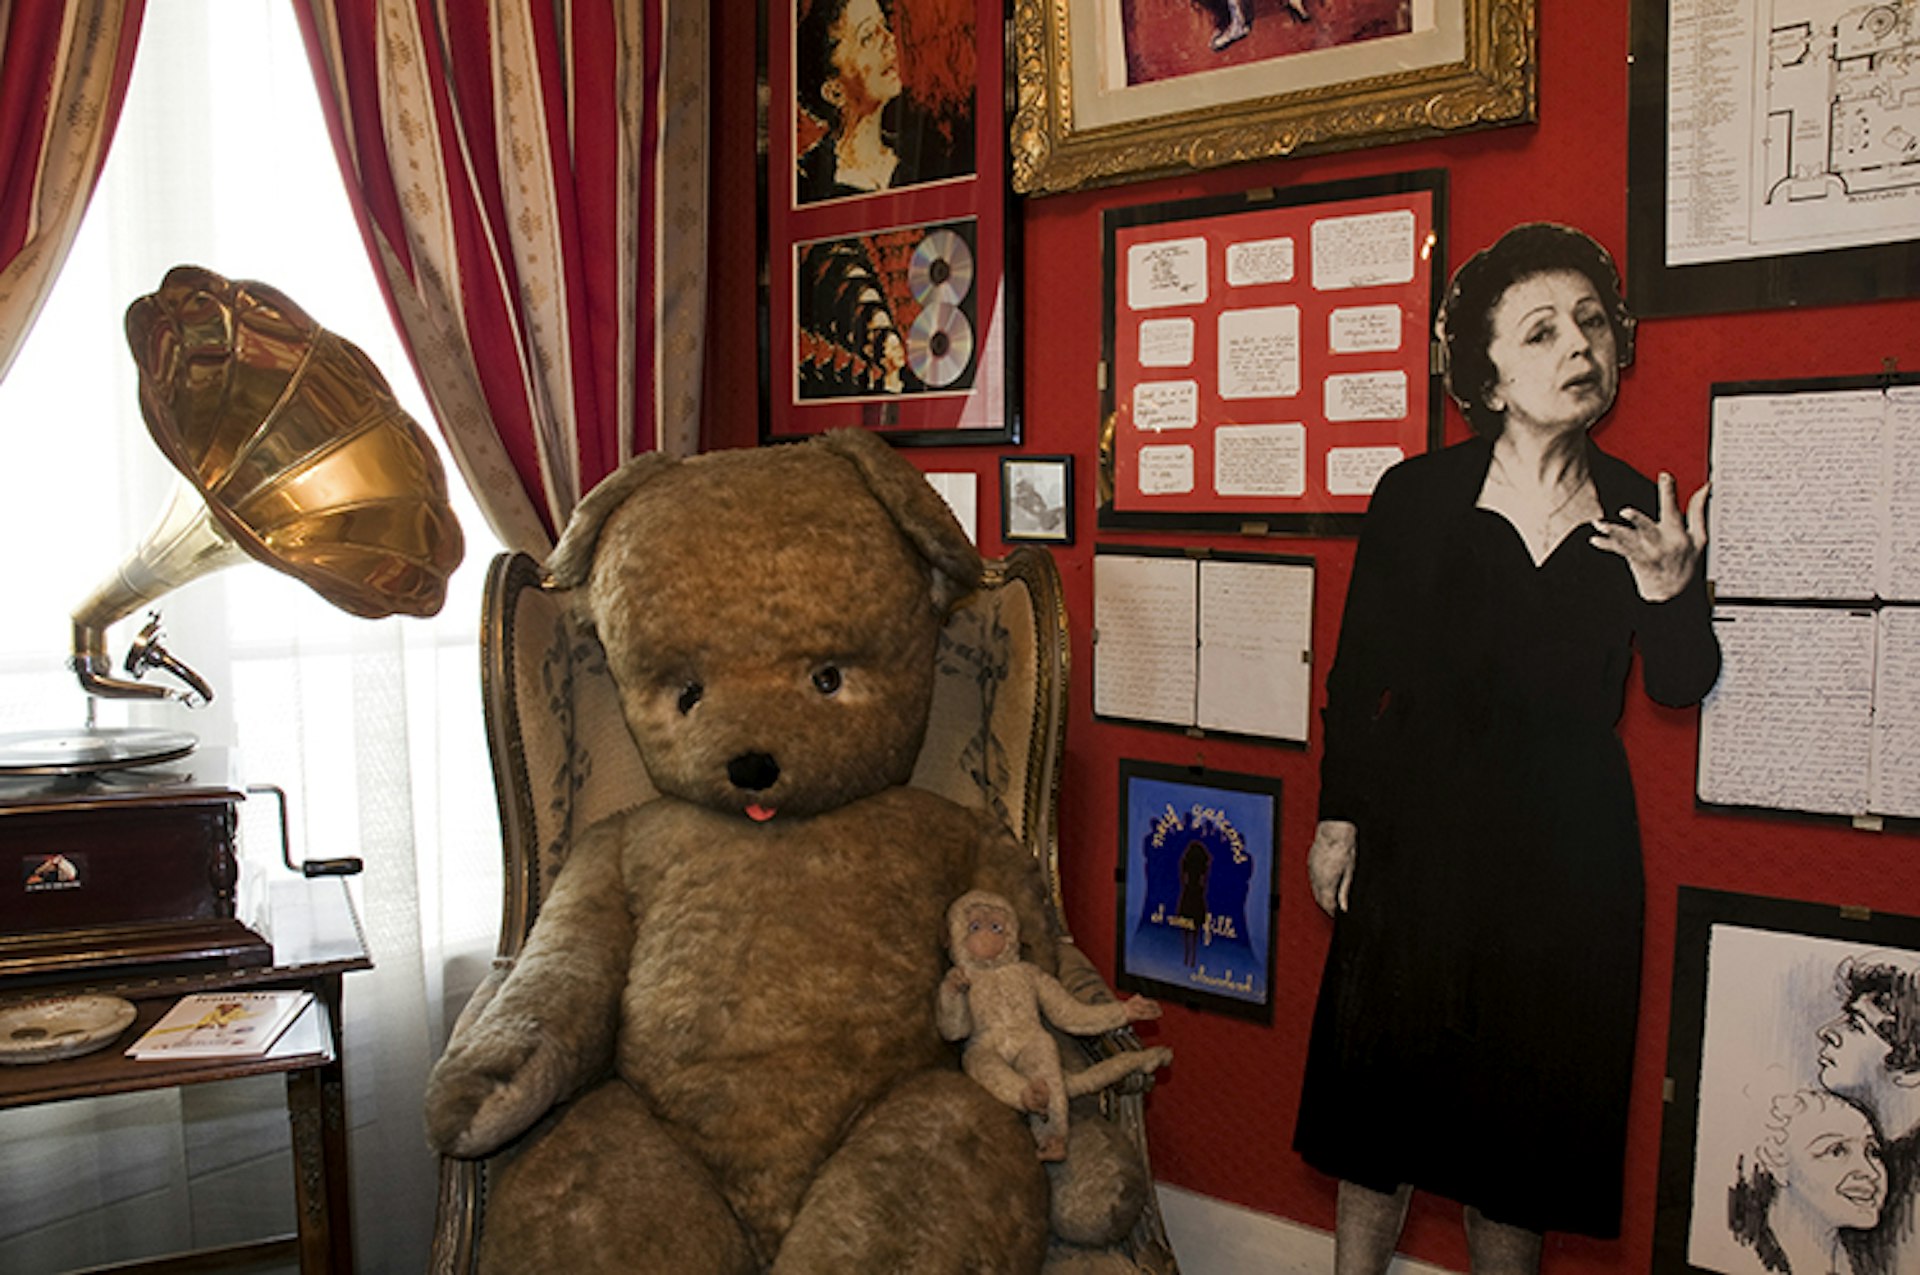 Quirky exhibits inside the Musée Edith Piaf.